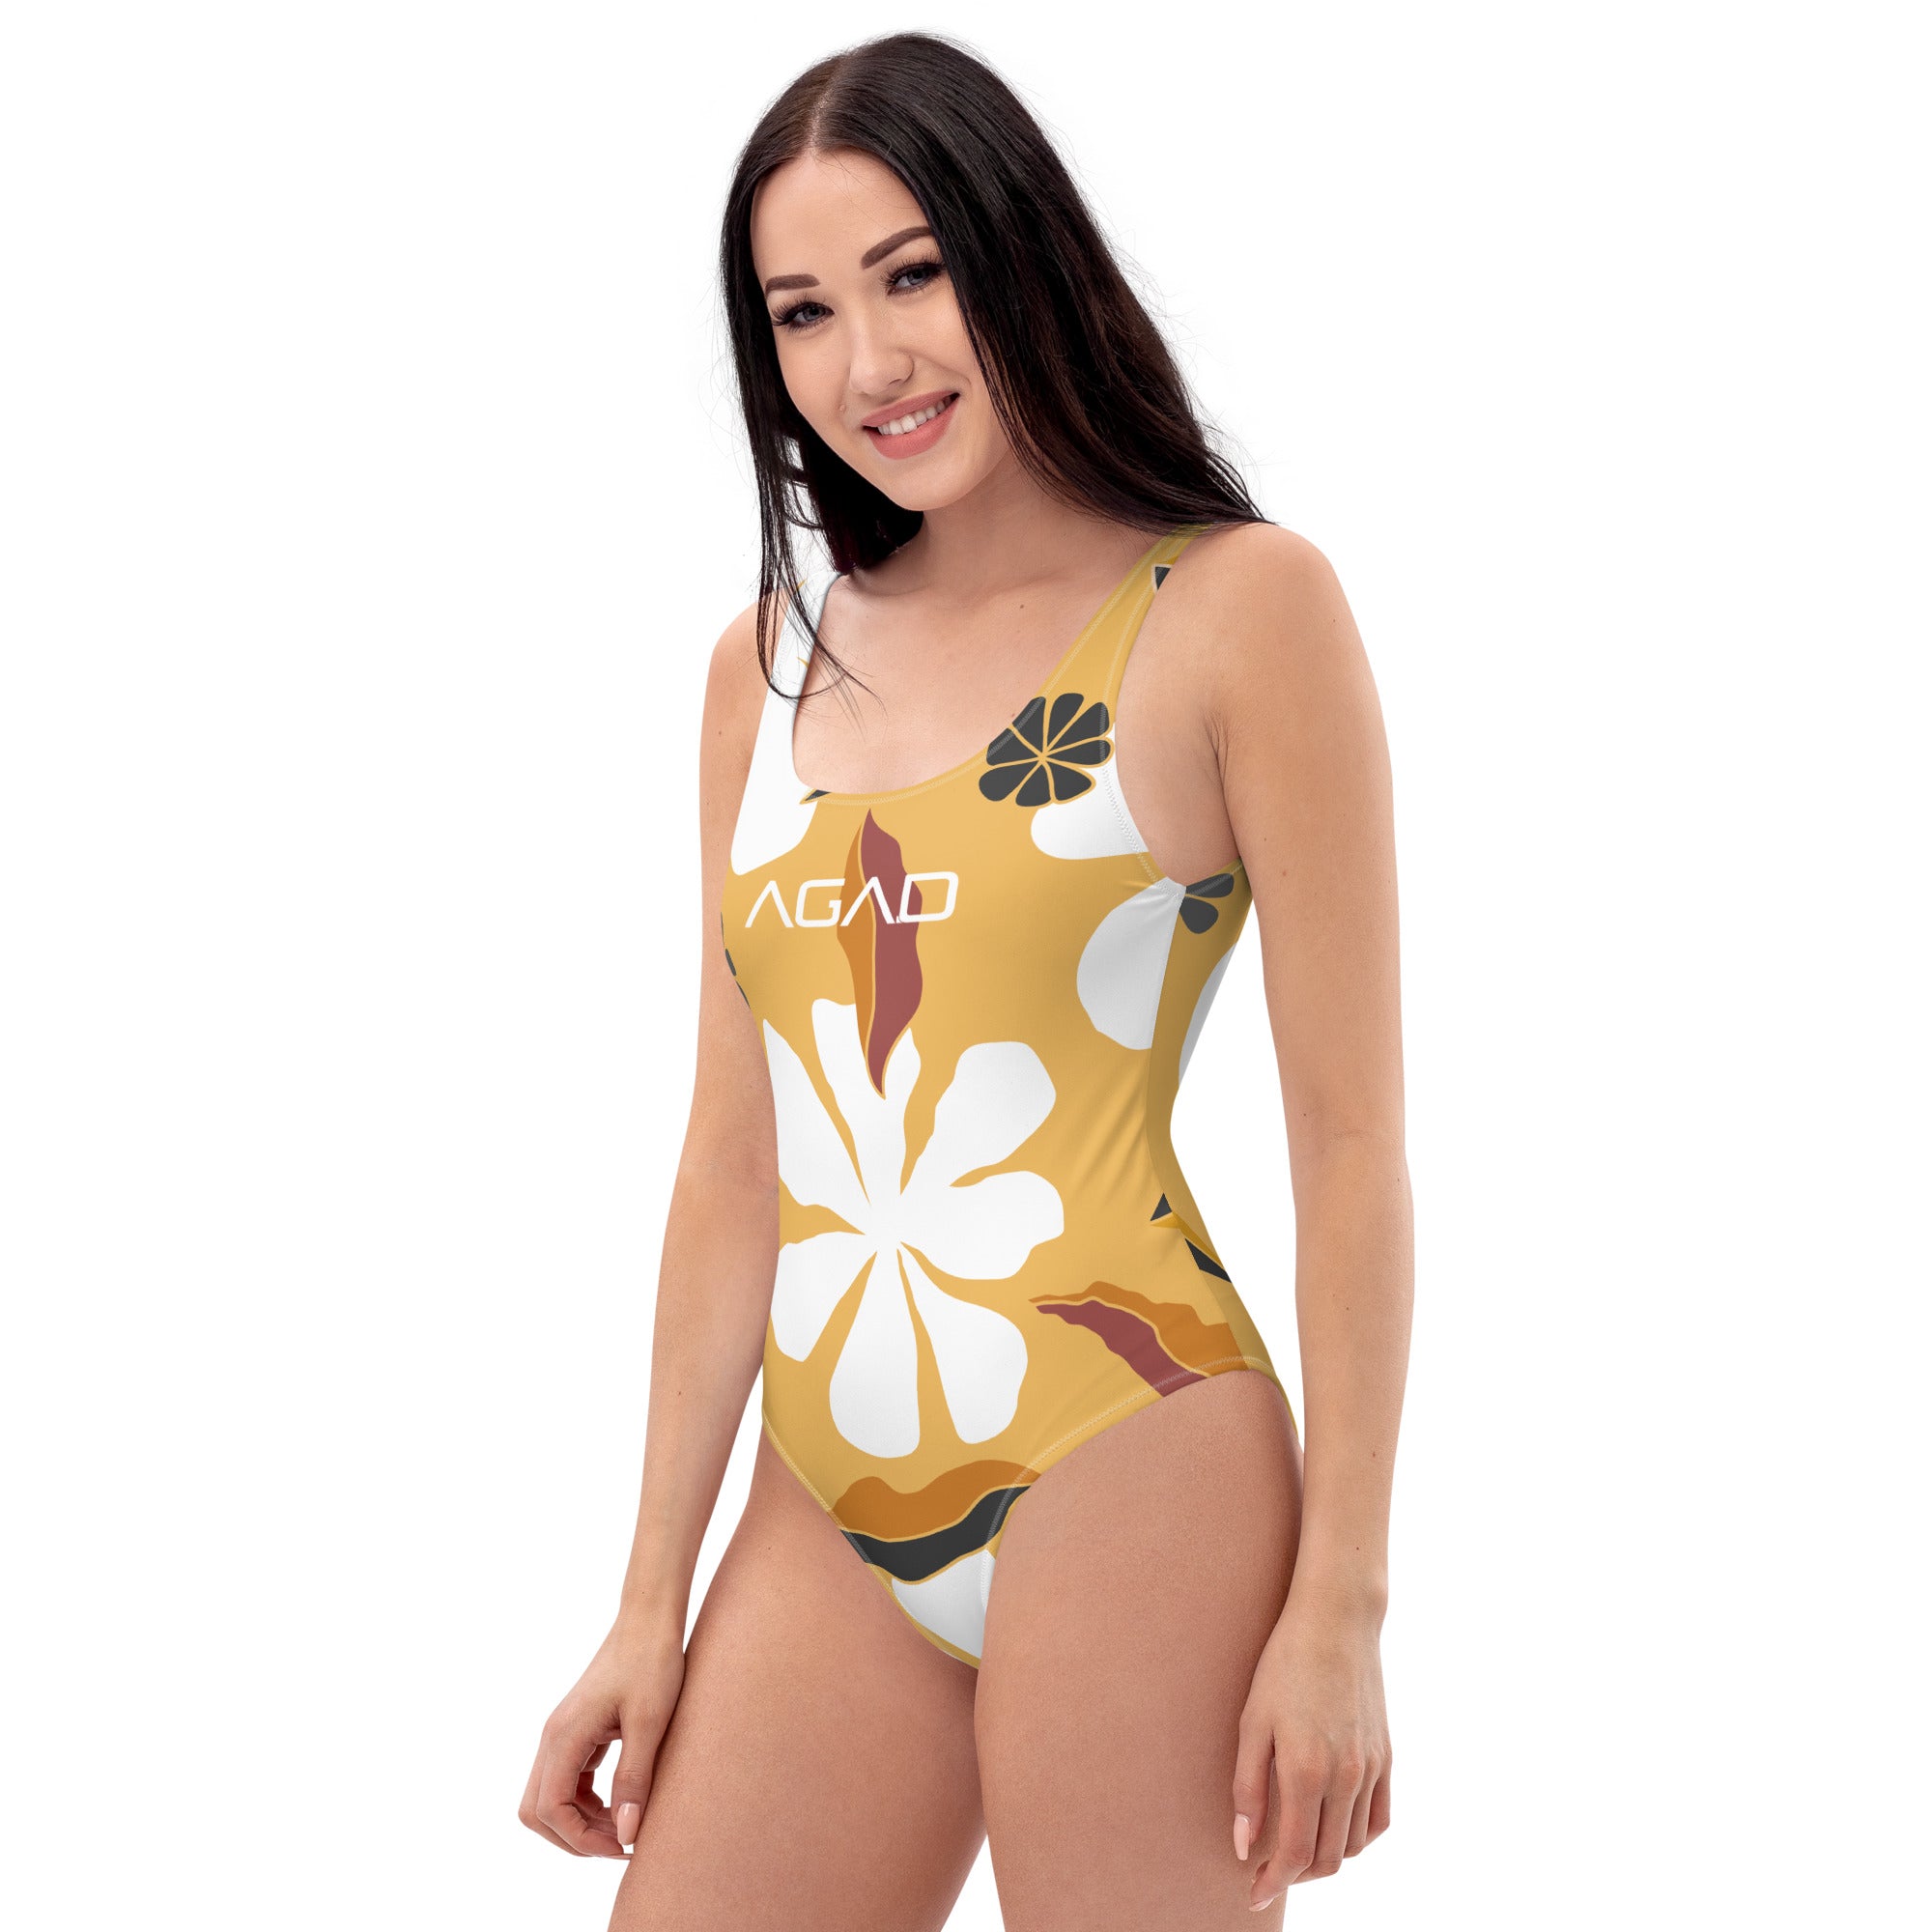 AGAD Summer 24 (Lily Amarillo) One-Piece Swimsuit